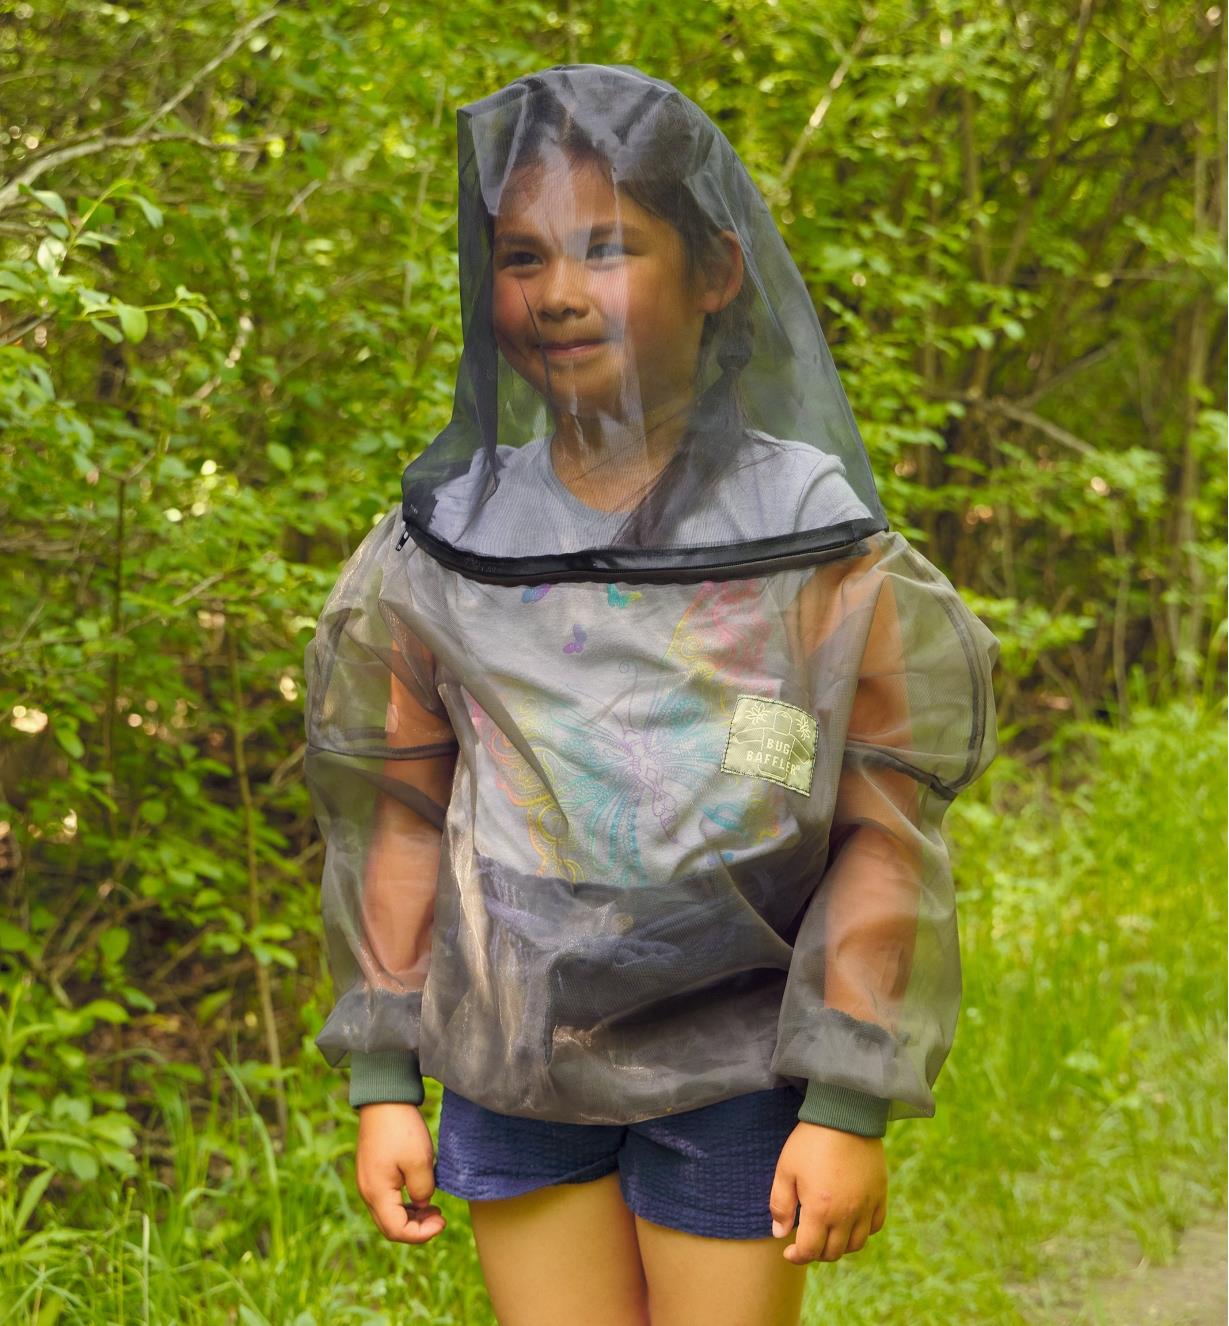 A child wears a bug-protection shirt in a woodland setting